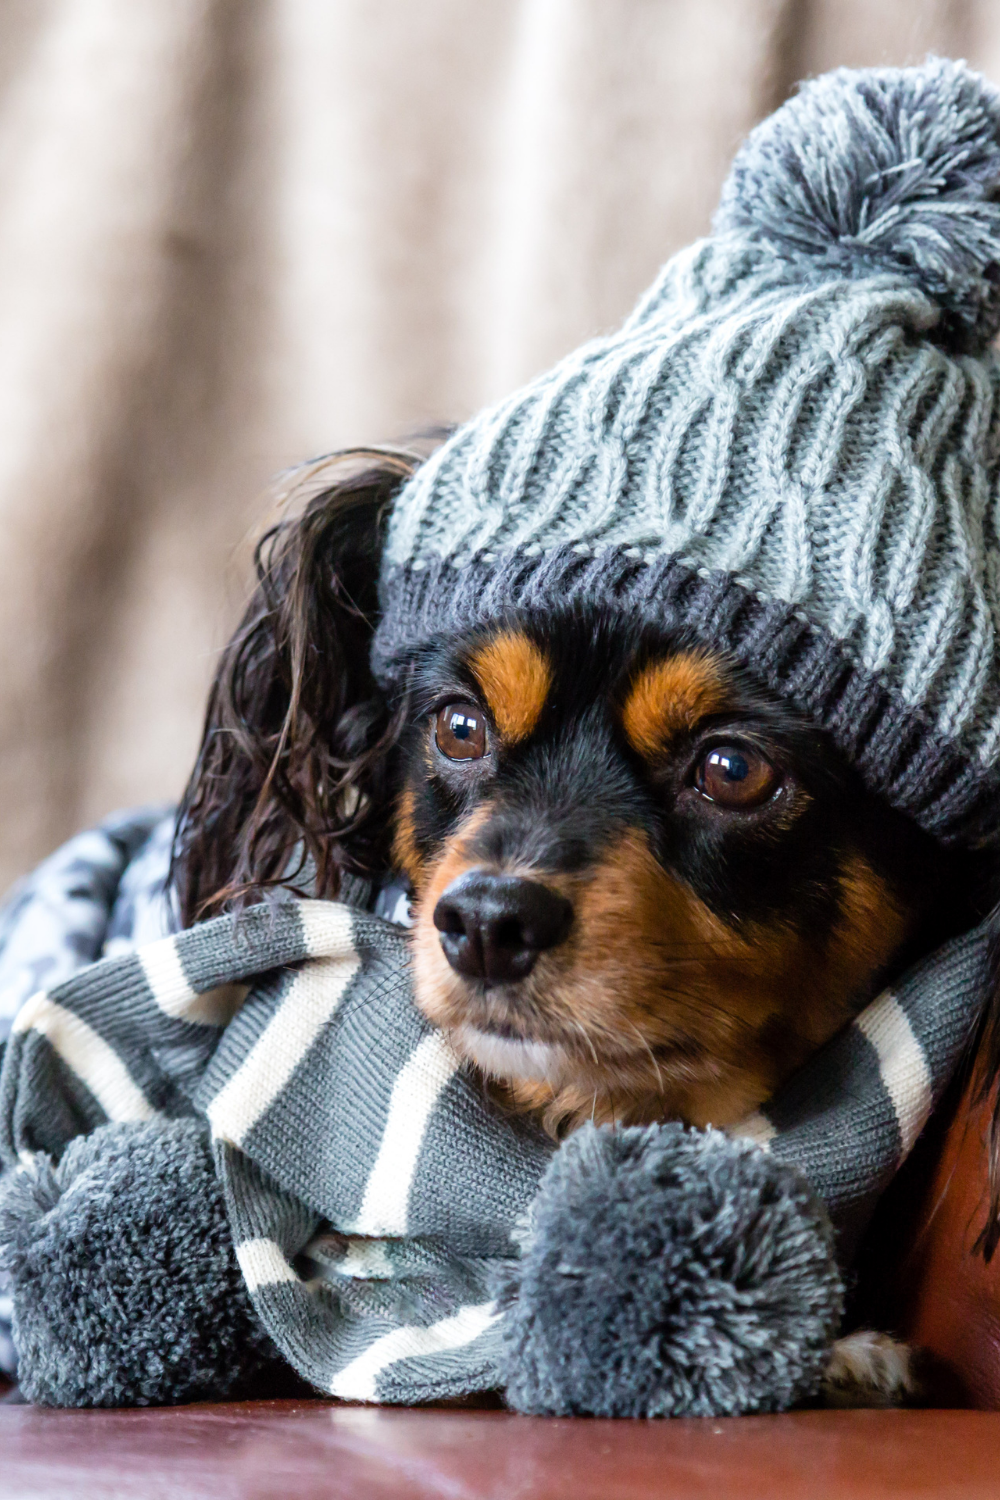 Help Your Dog Avoid Winter Blues With These Safety Measures